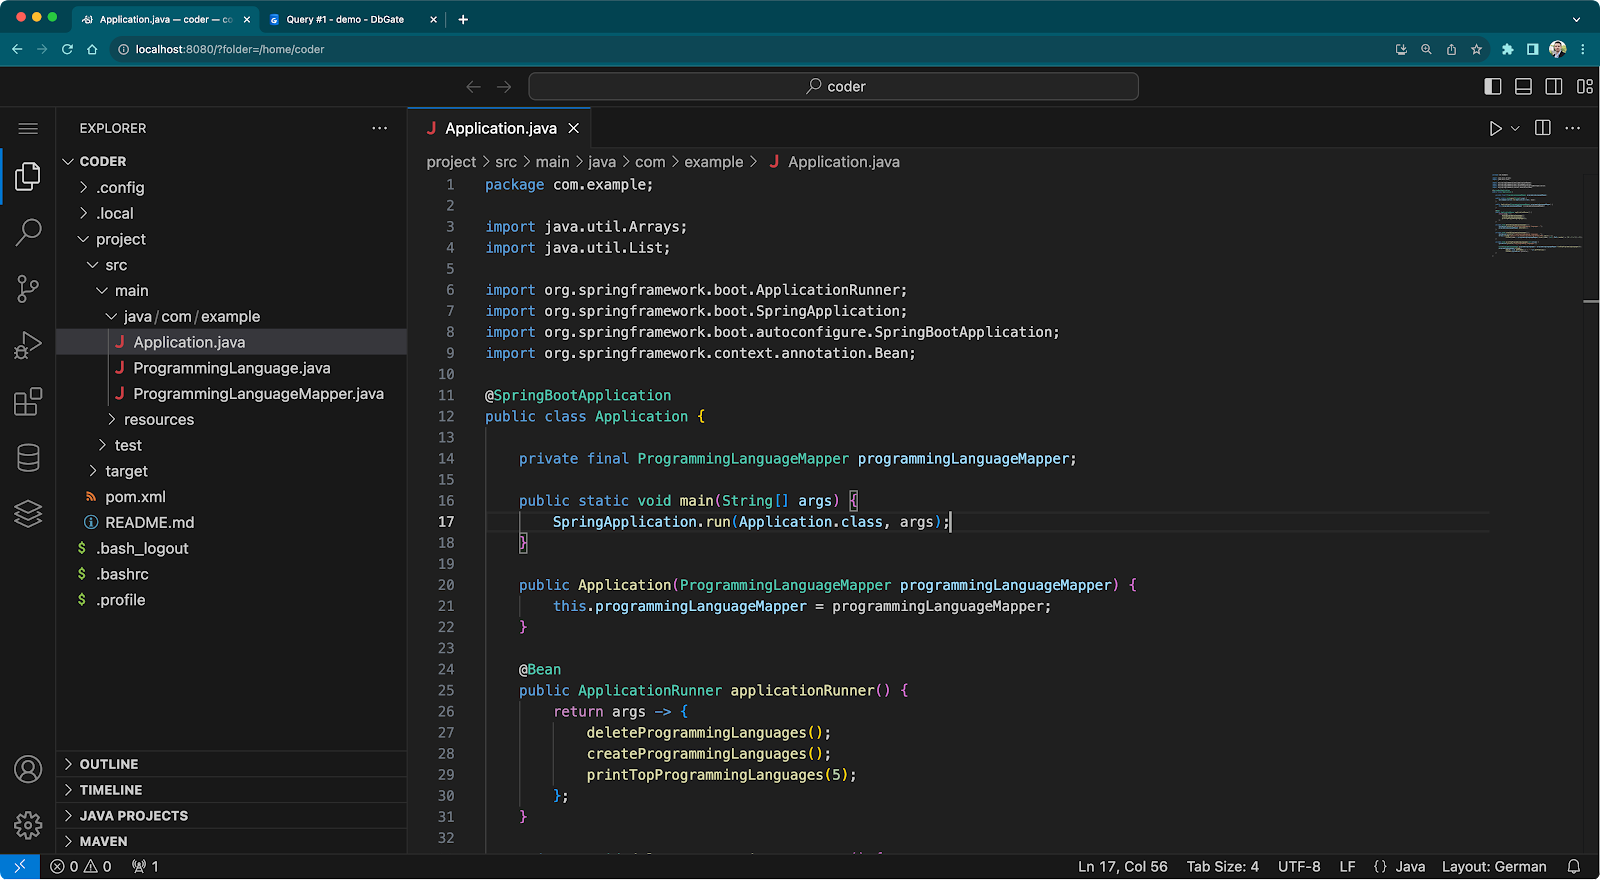 VS Code running in the browser